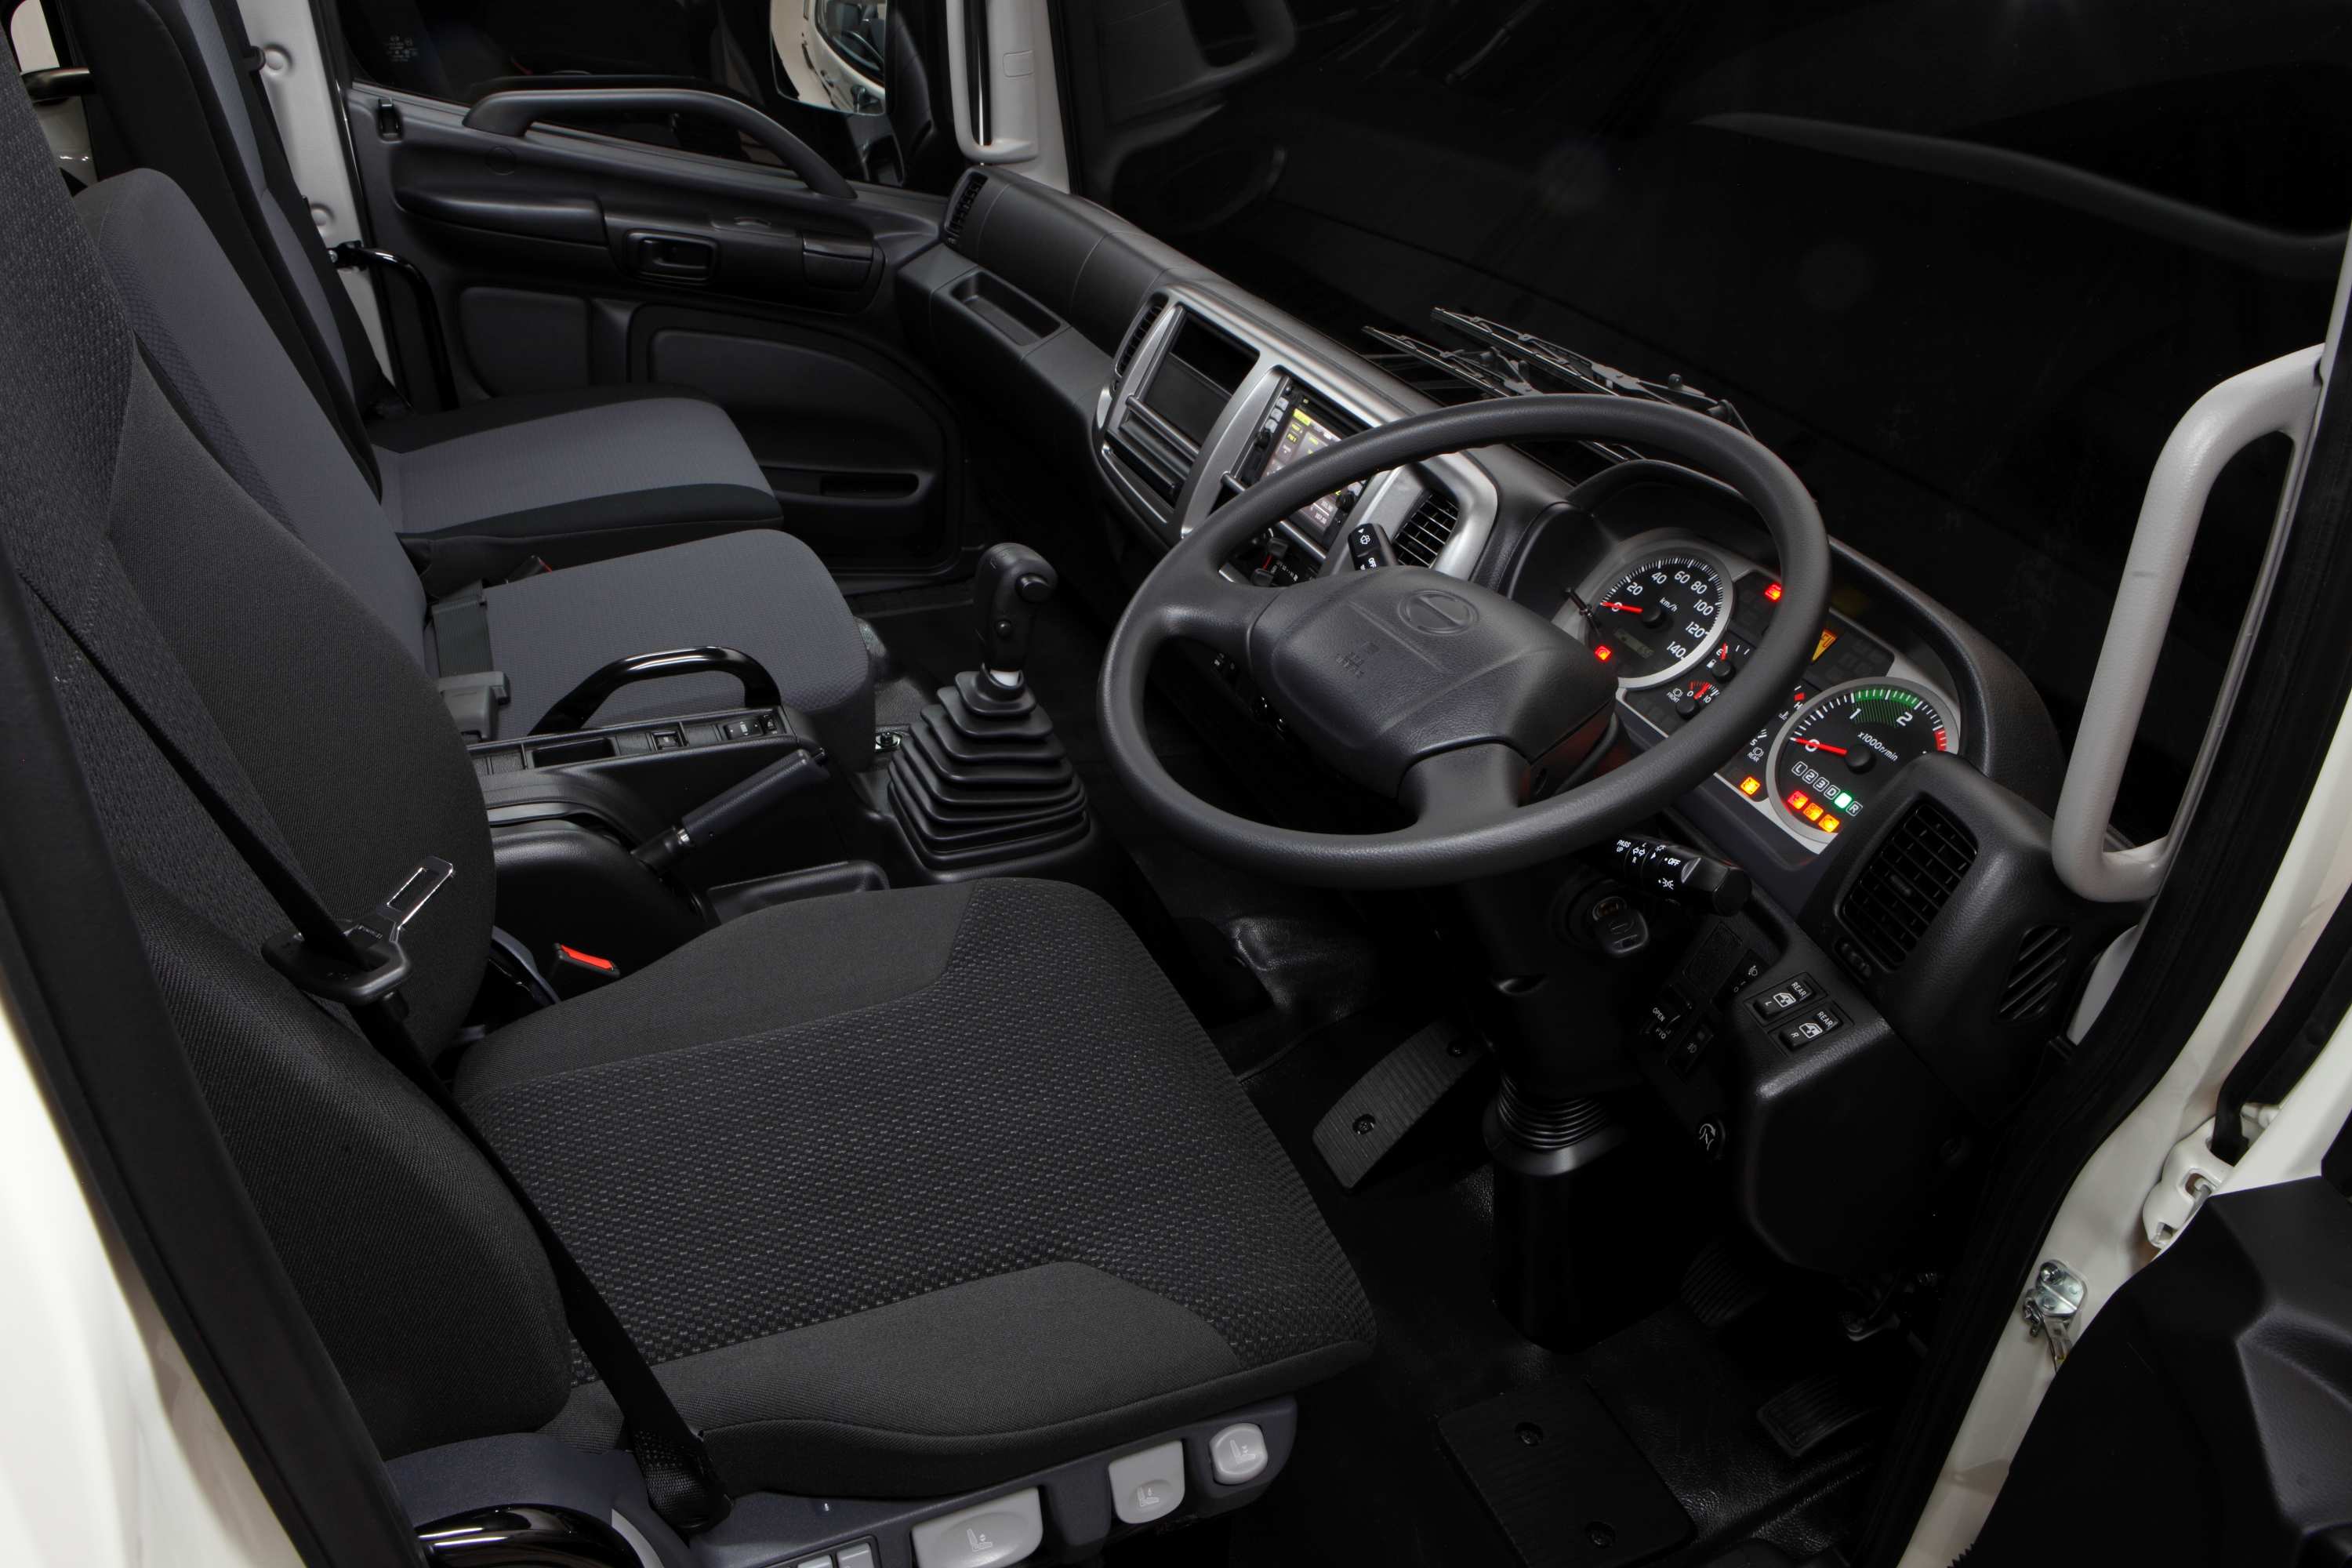 HINO 500 Series 1528 4X4 GT front dash